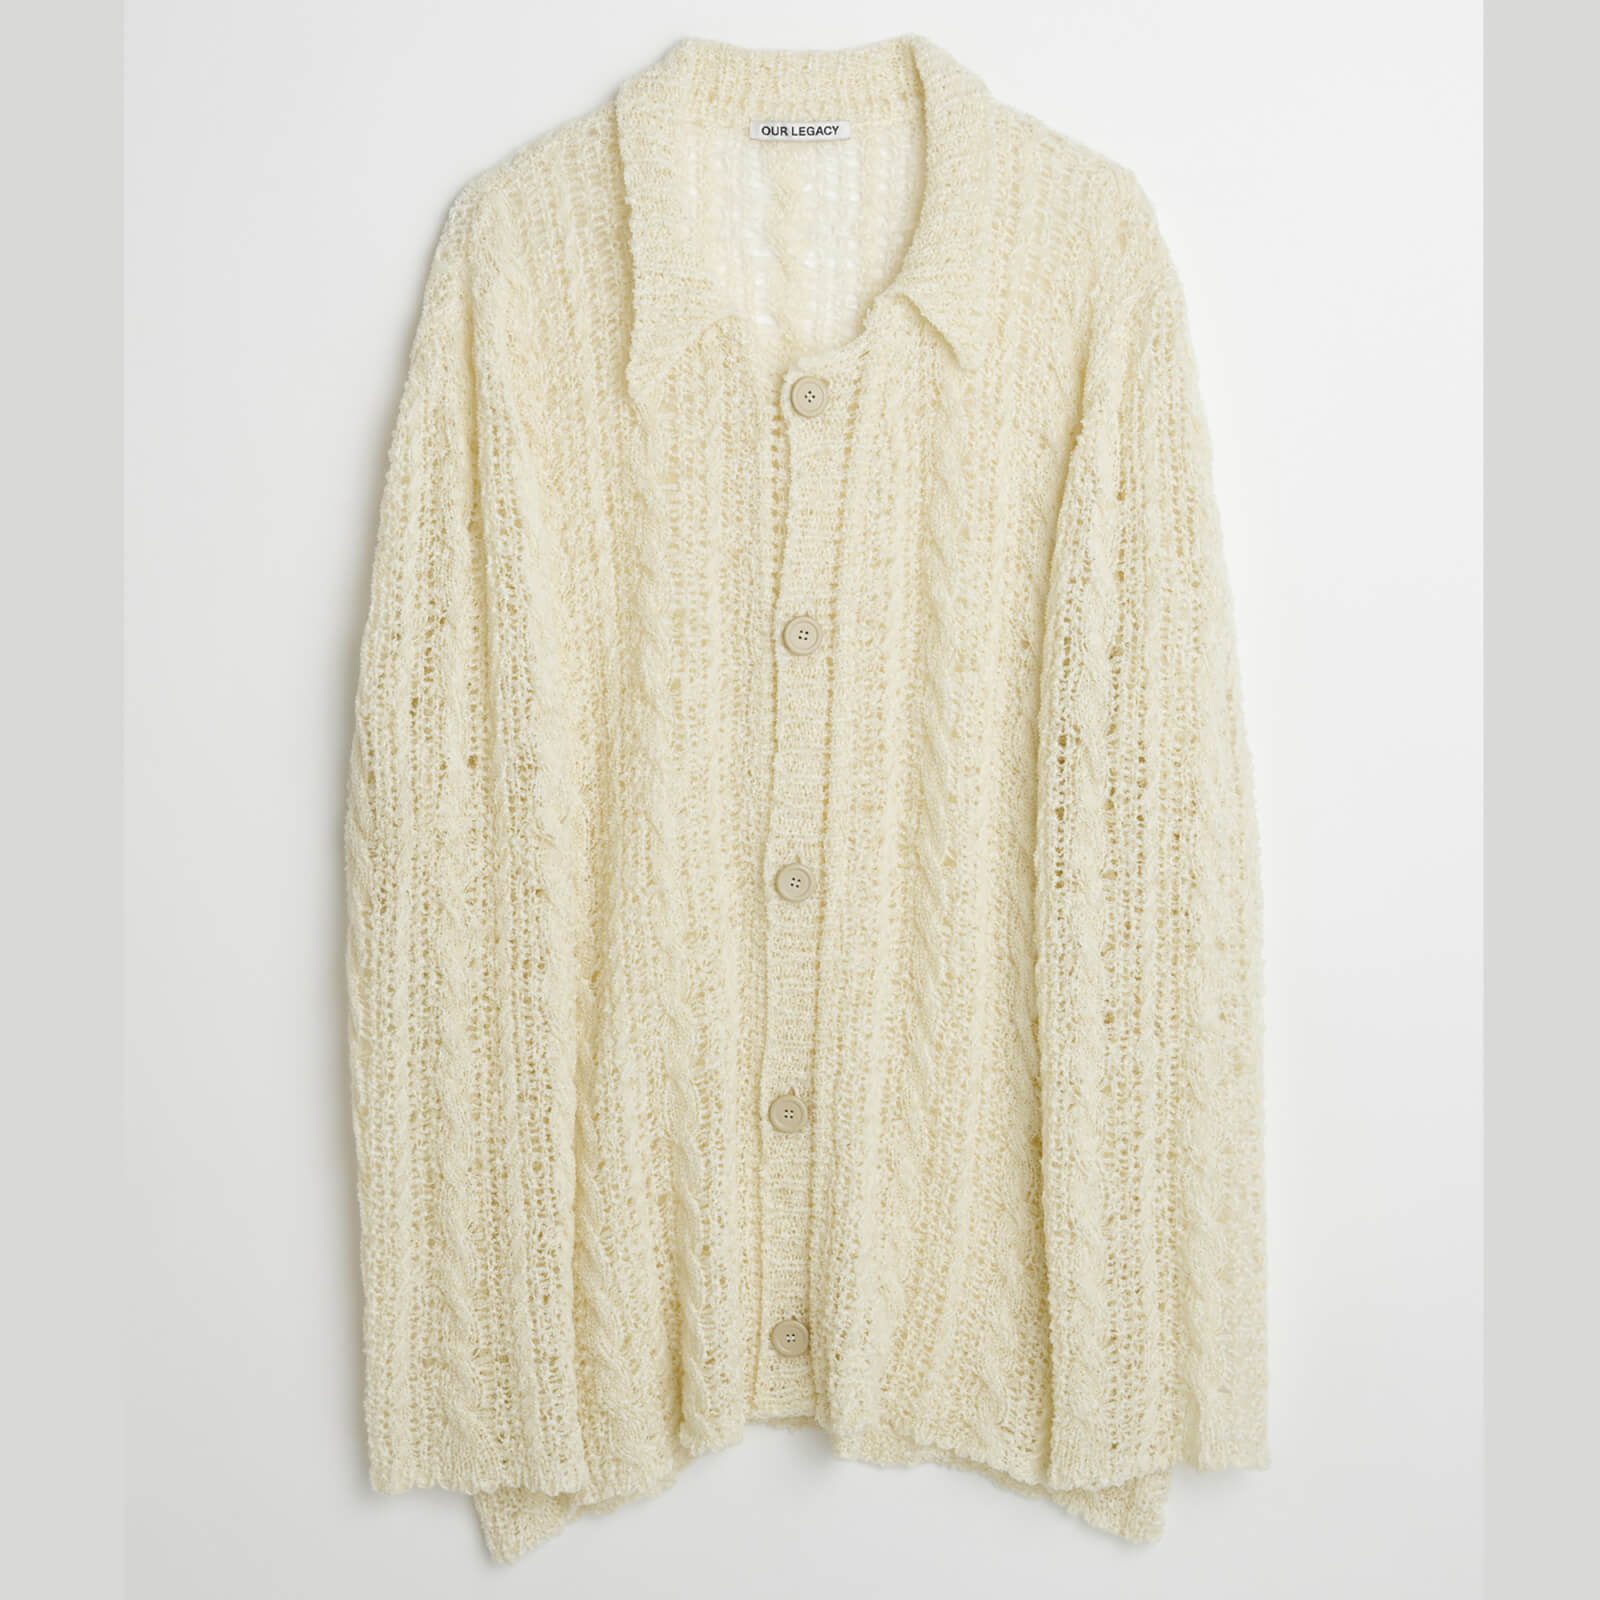 our legacy big sheer cable knit cardigan - 50/l